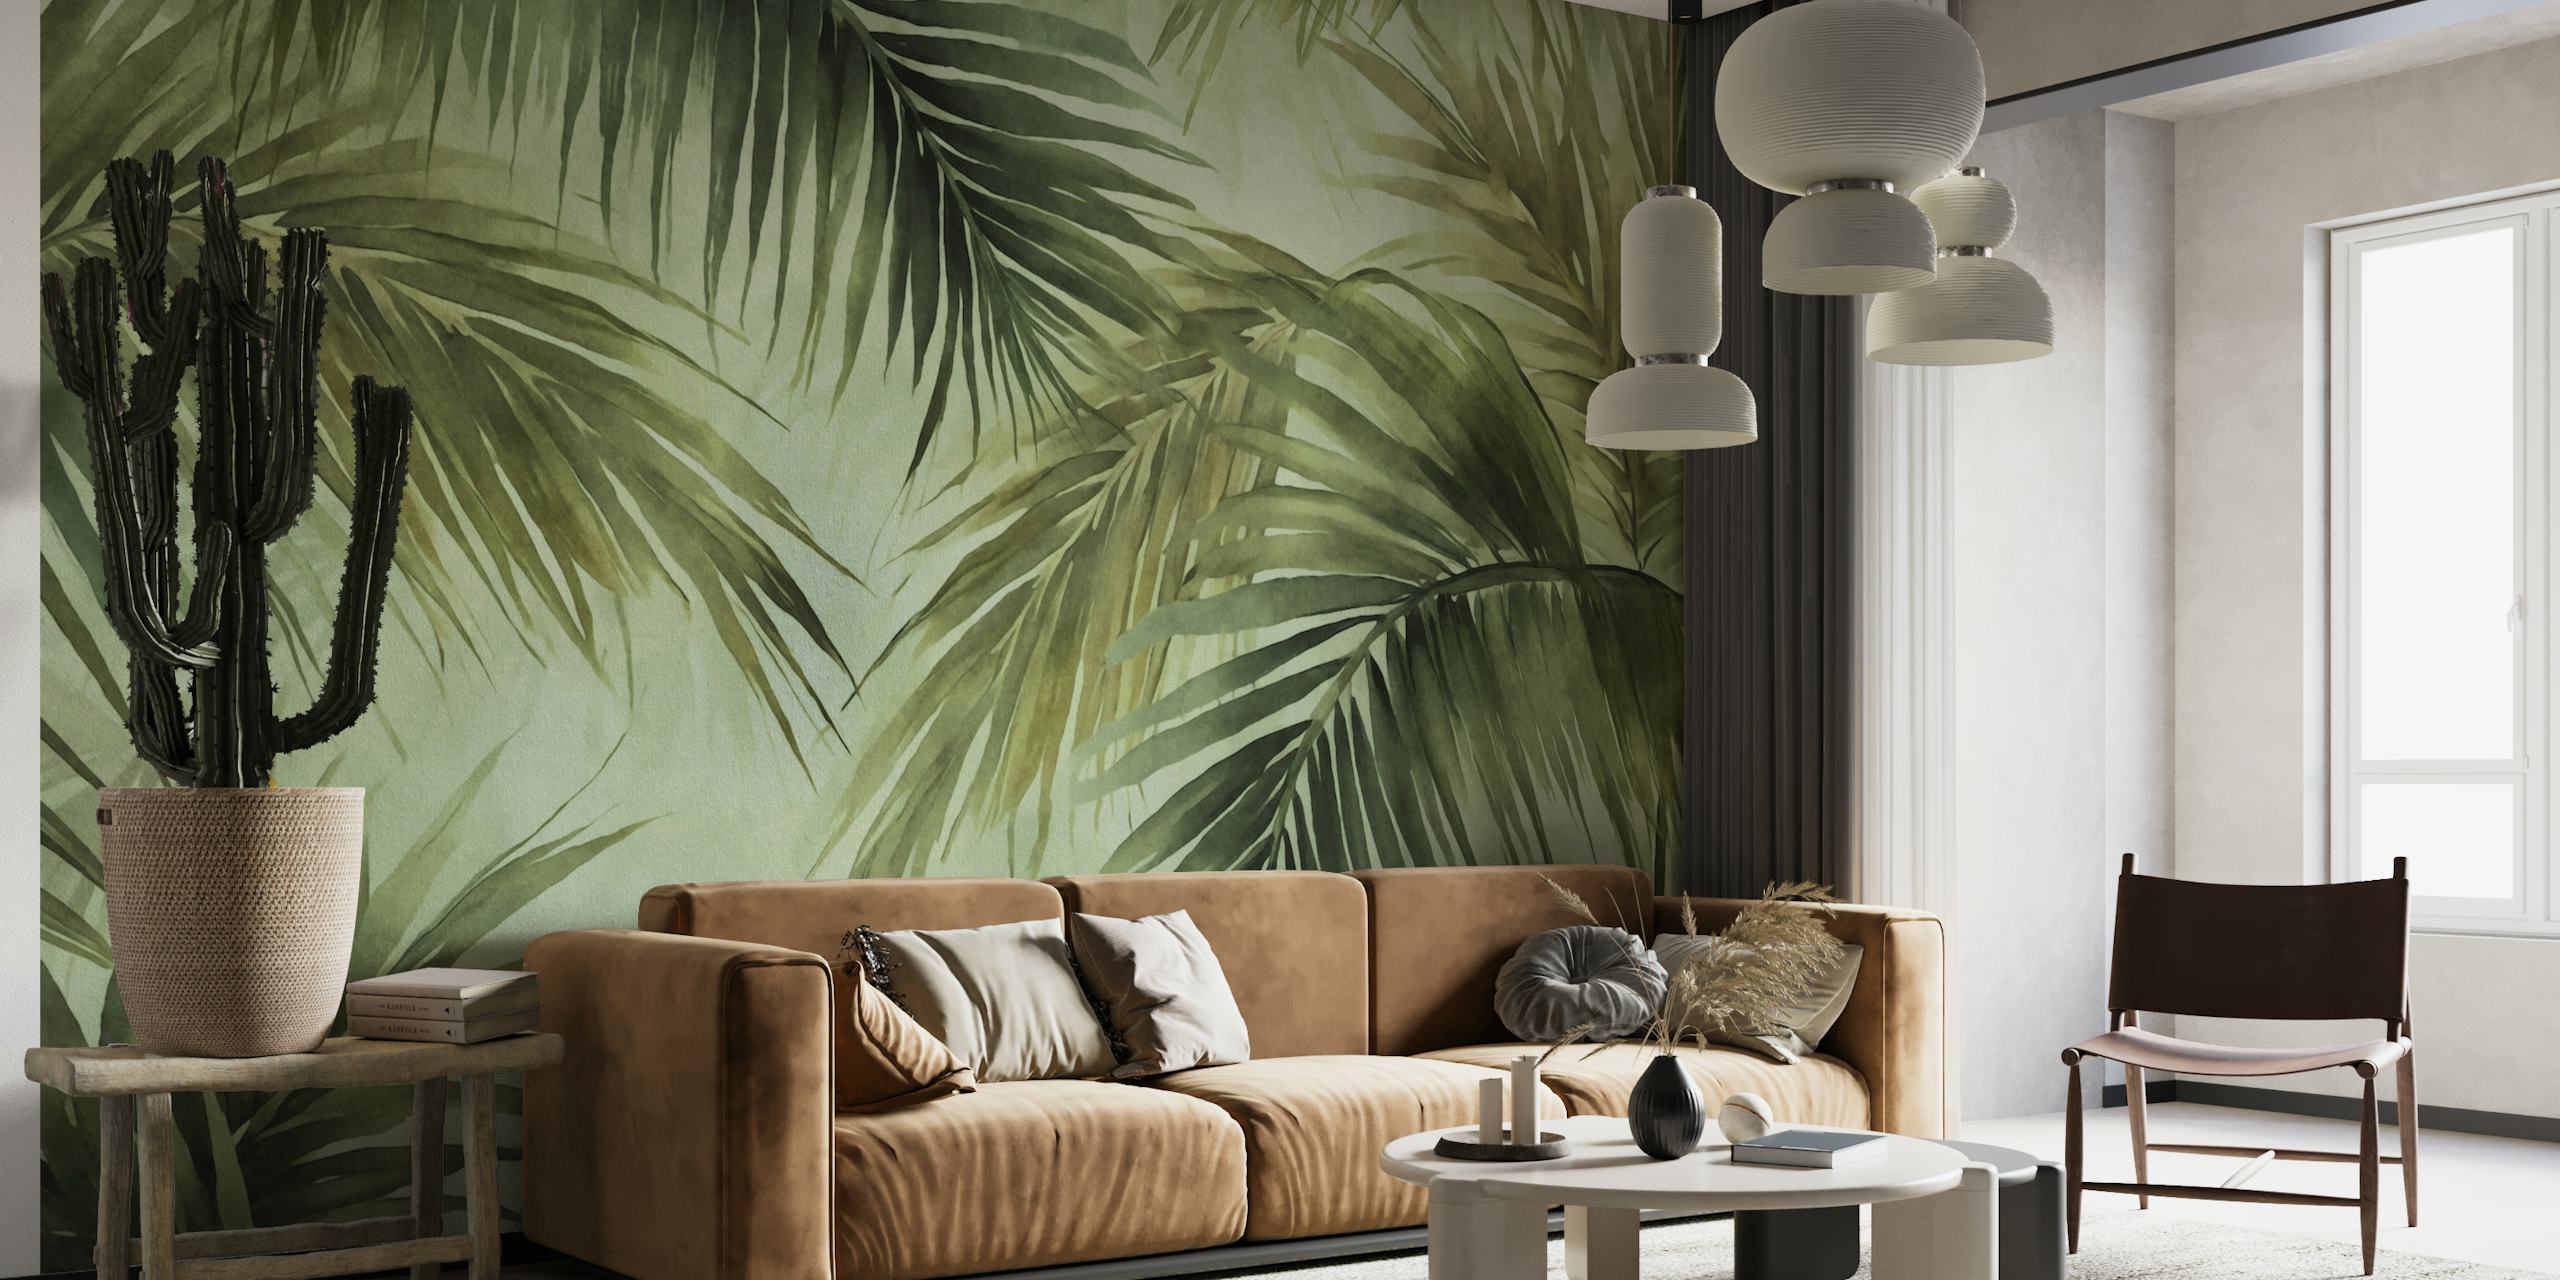 Watercolor palm leaf mural in moody hues, perfect for creating a tropical island ambiance.